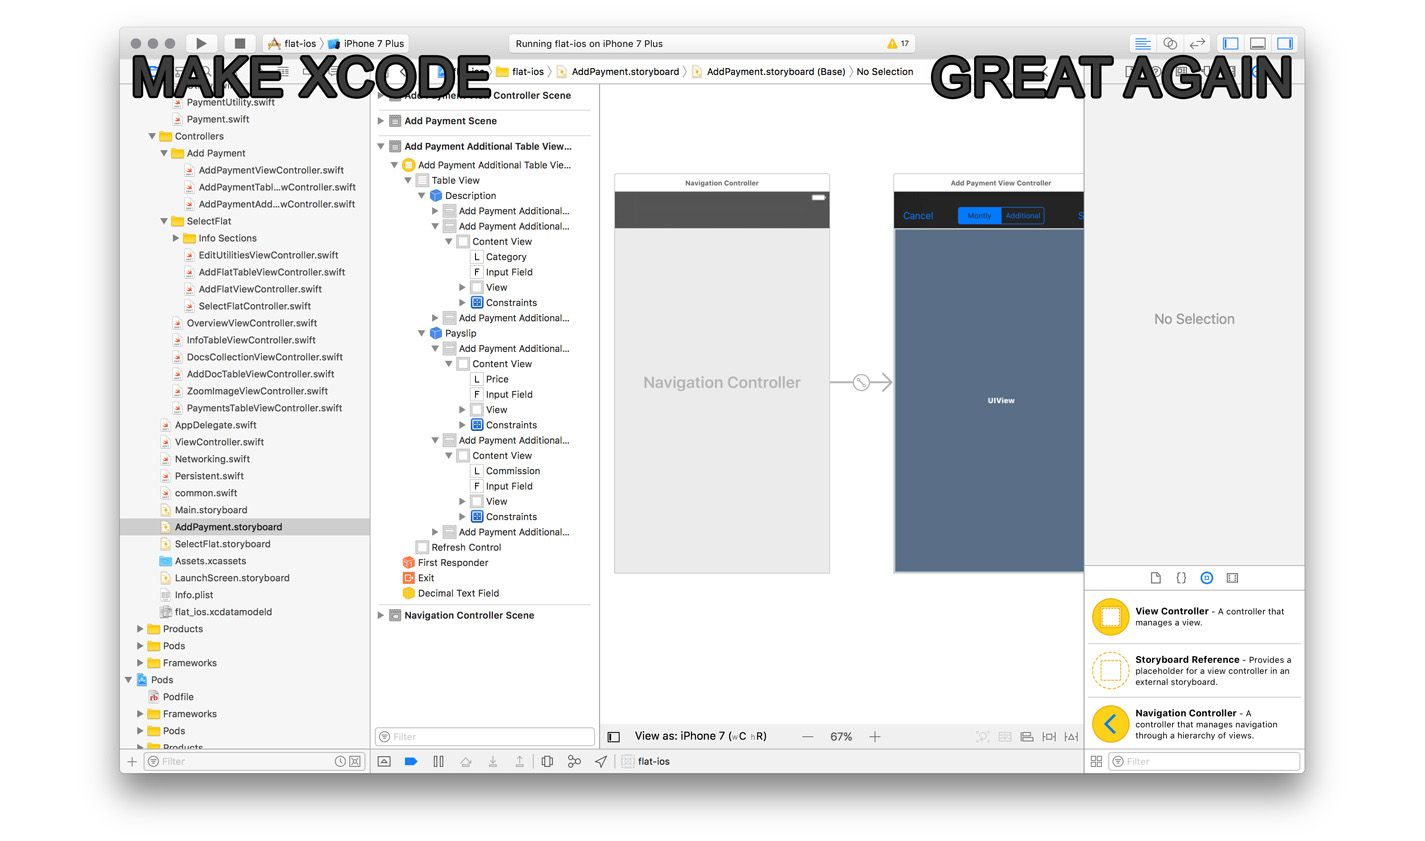 Feature image of Sunday is another good day to fix the Xcode